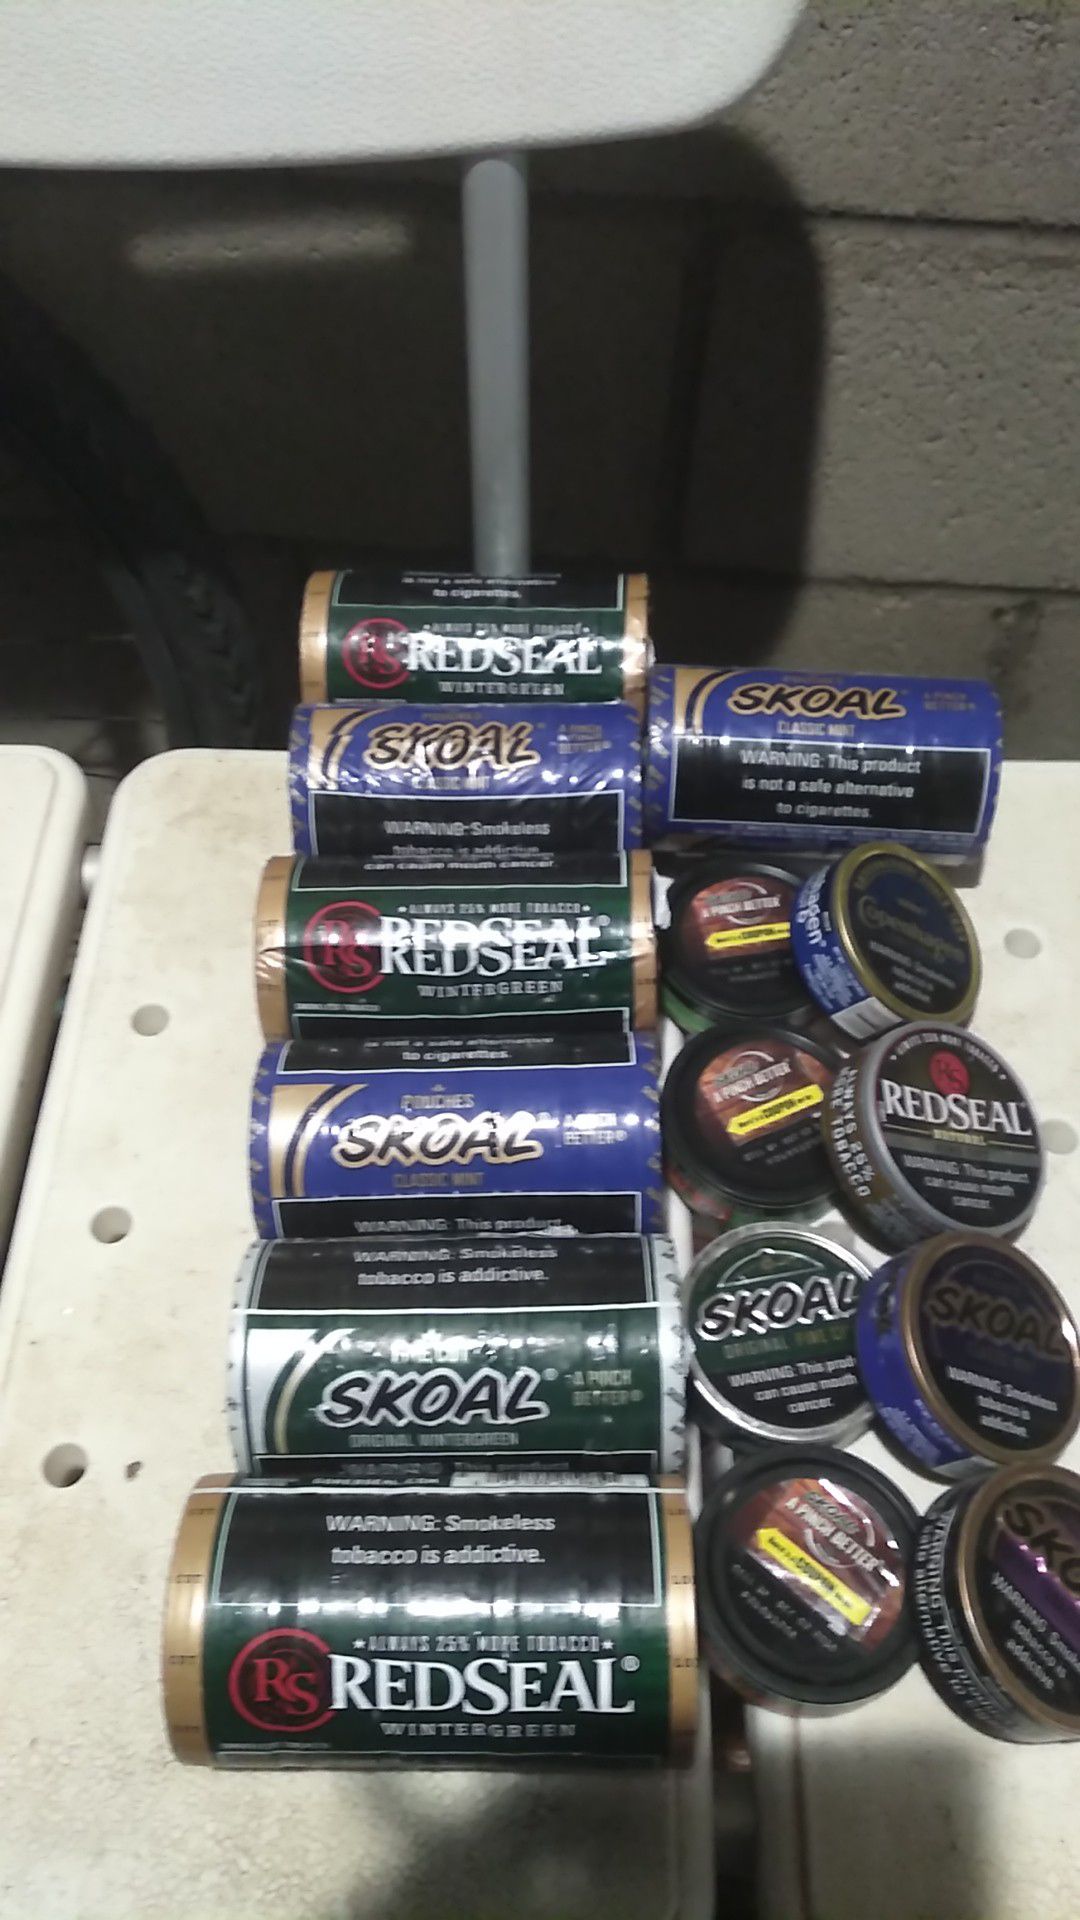 New Skoal and Red Seal